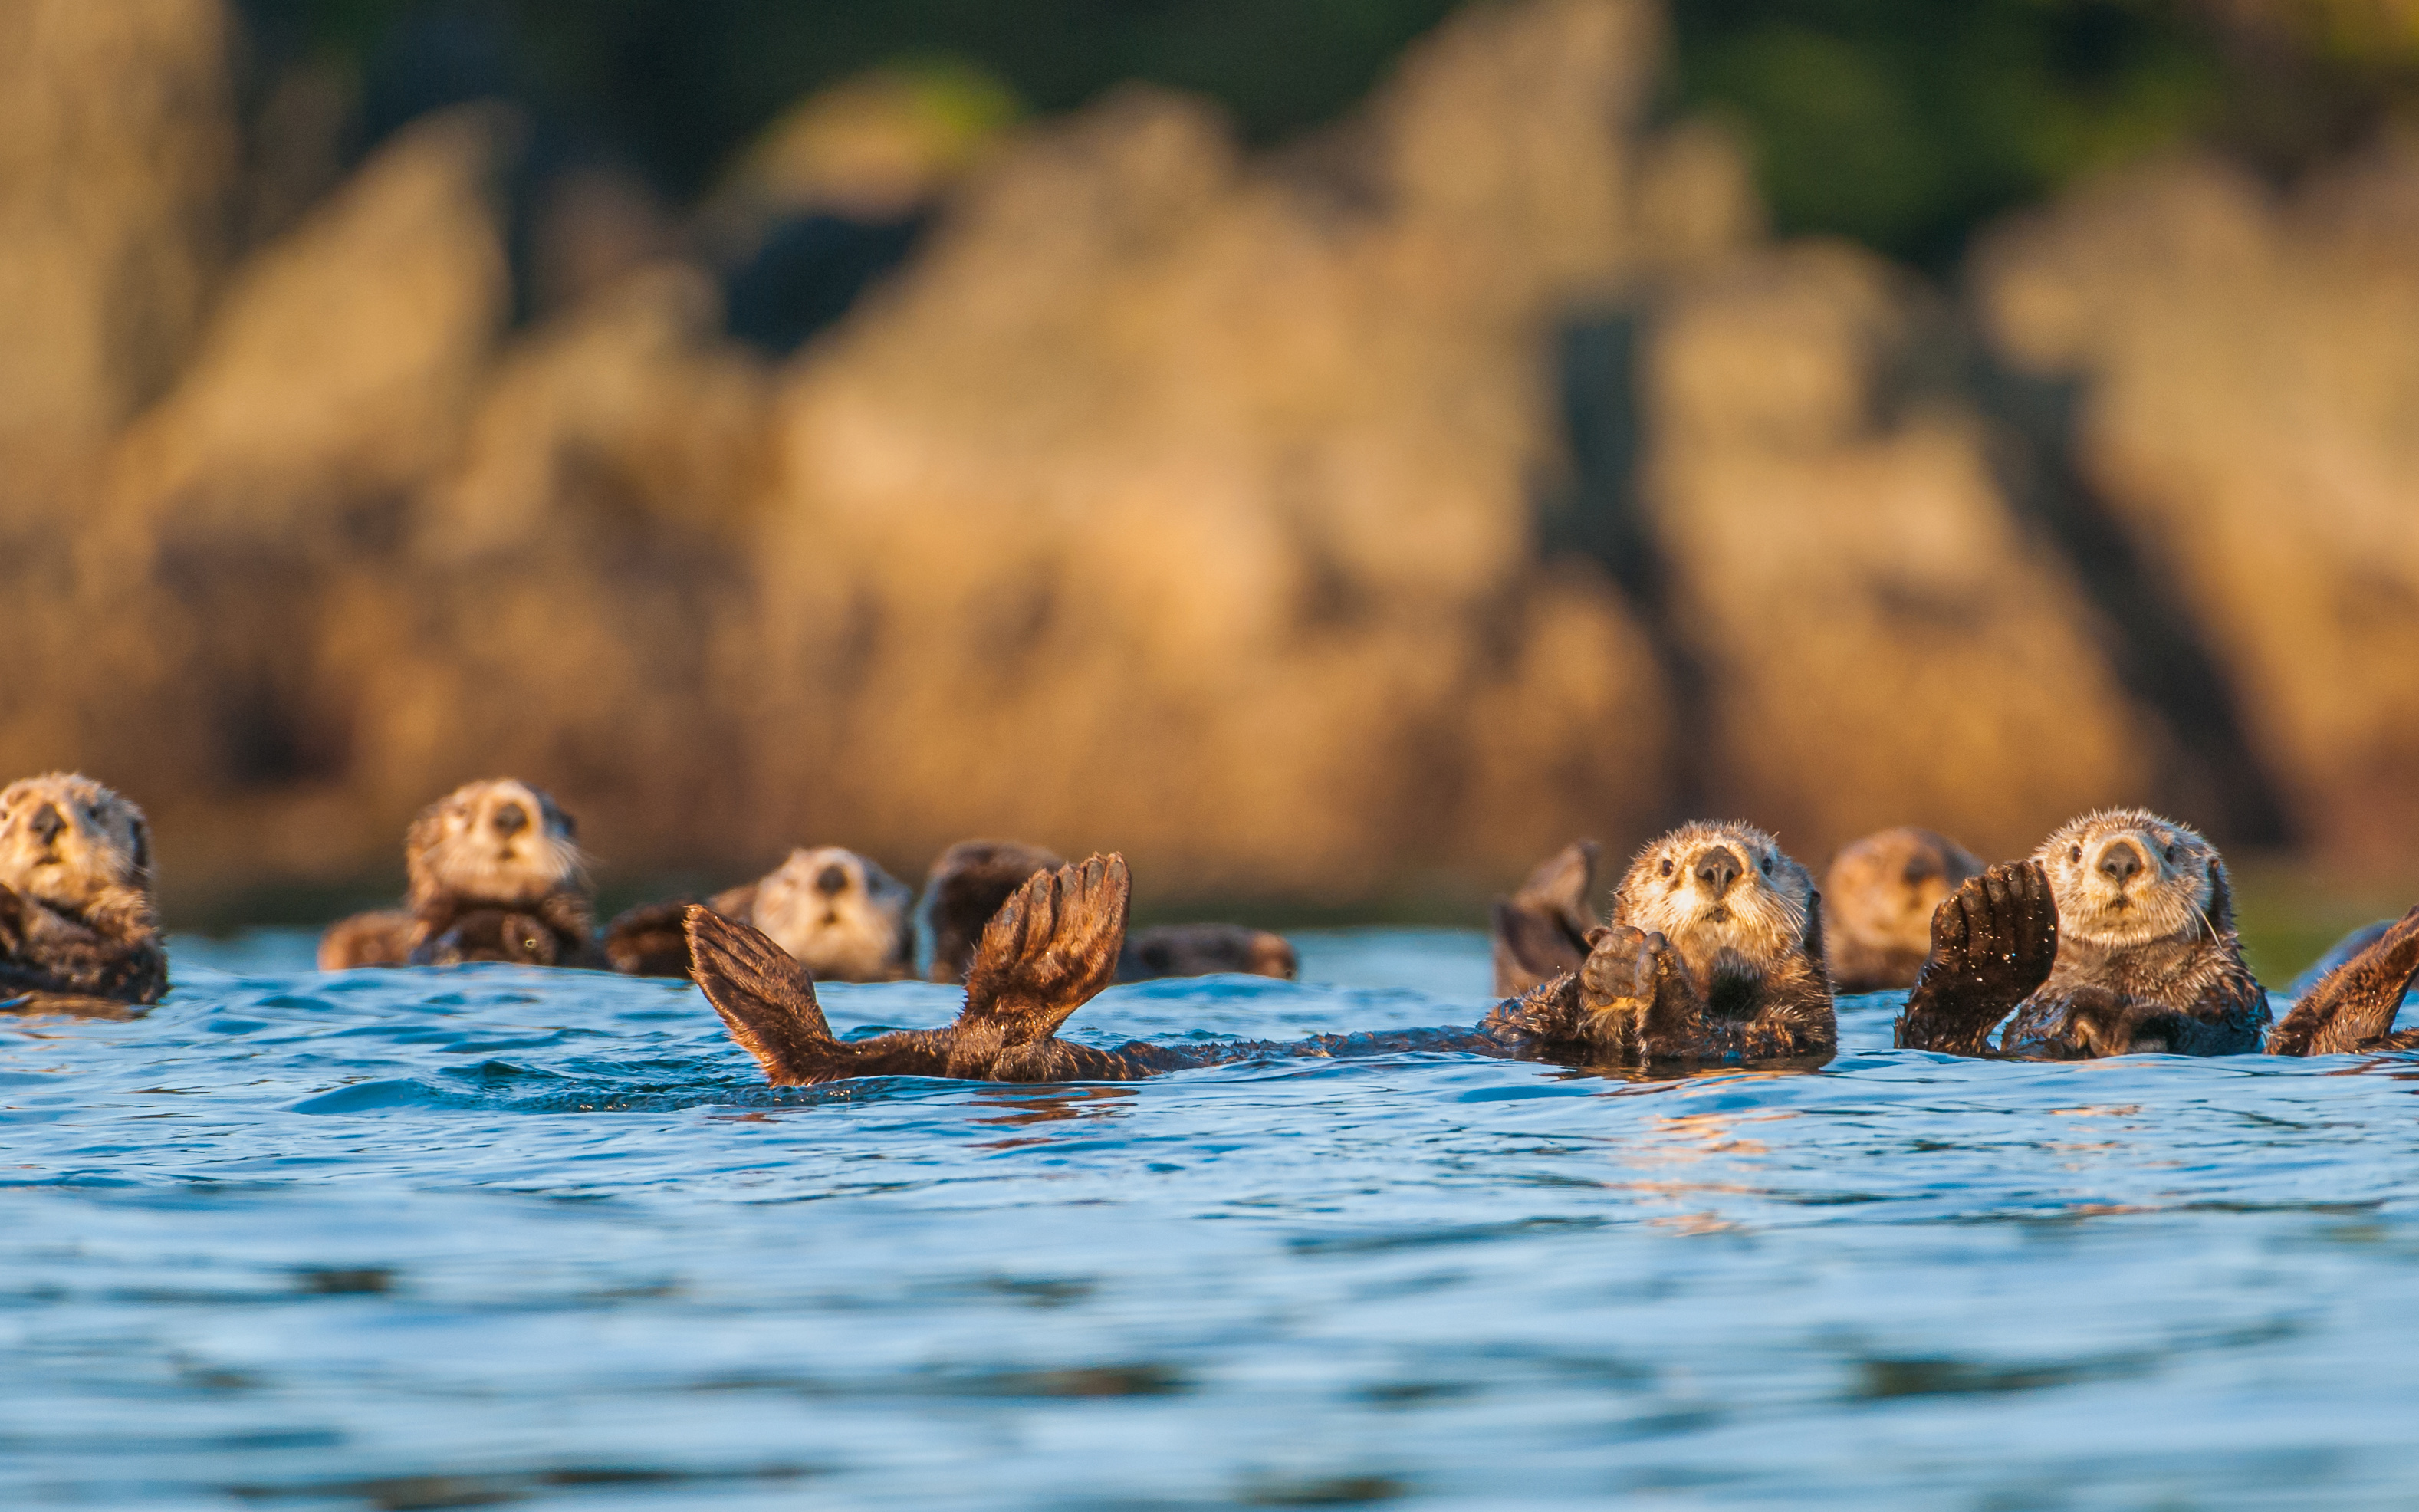 A new study offers fresh perspectives on the ecological and economic impact of sea otters. (Credit: James Thompson)